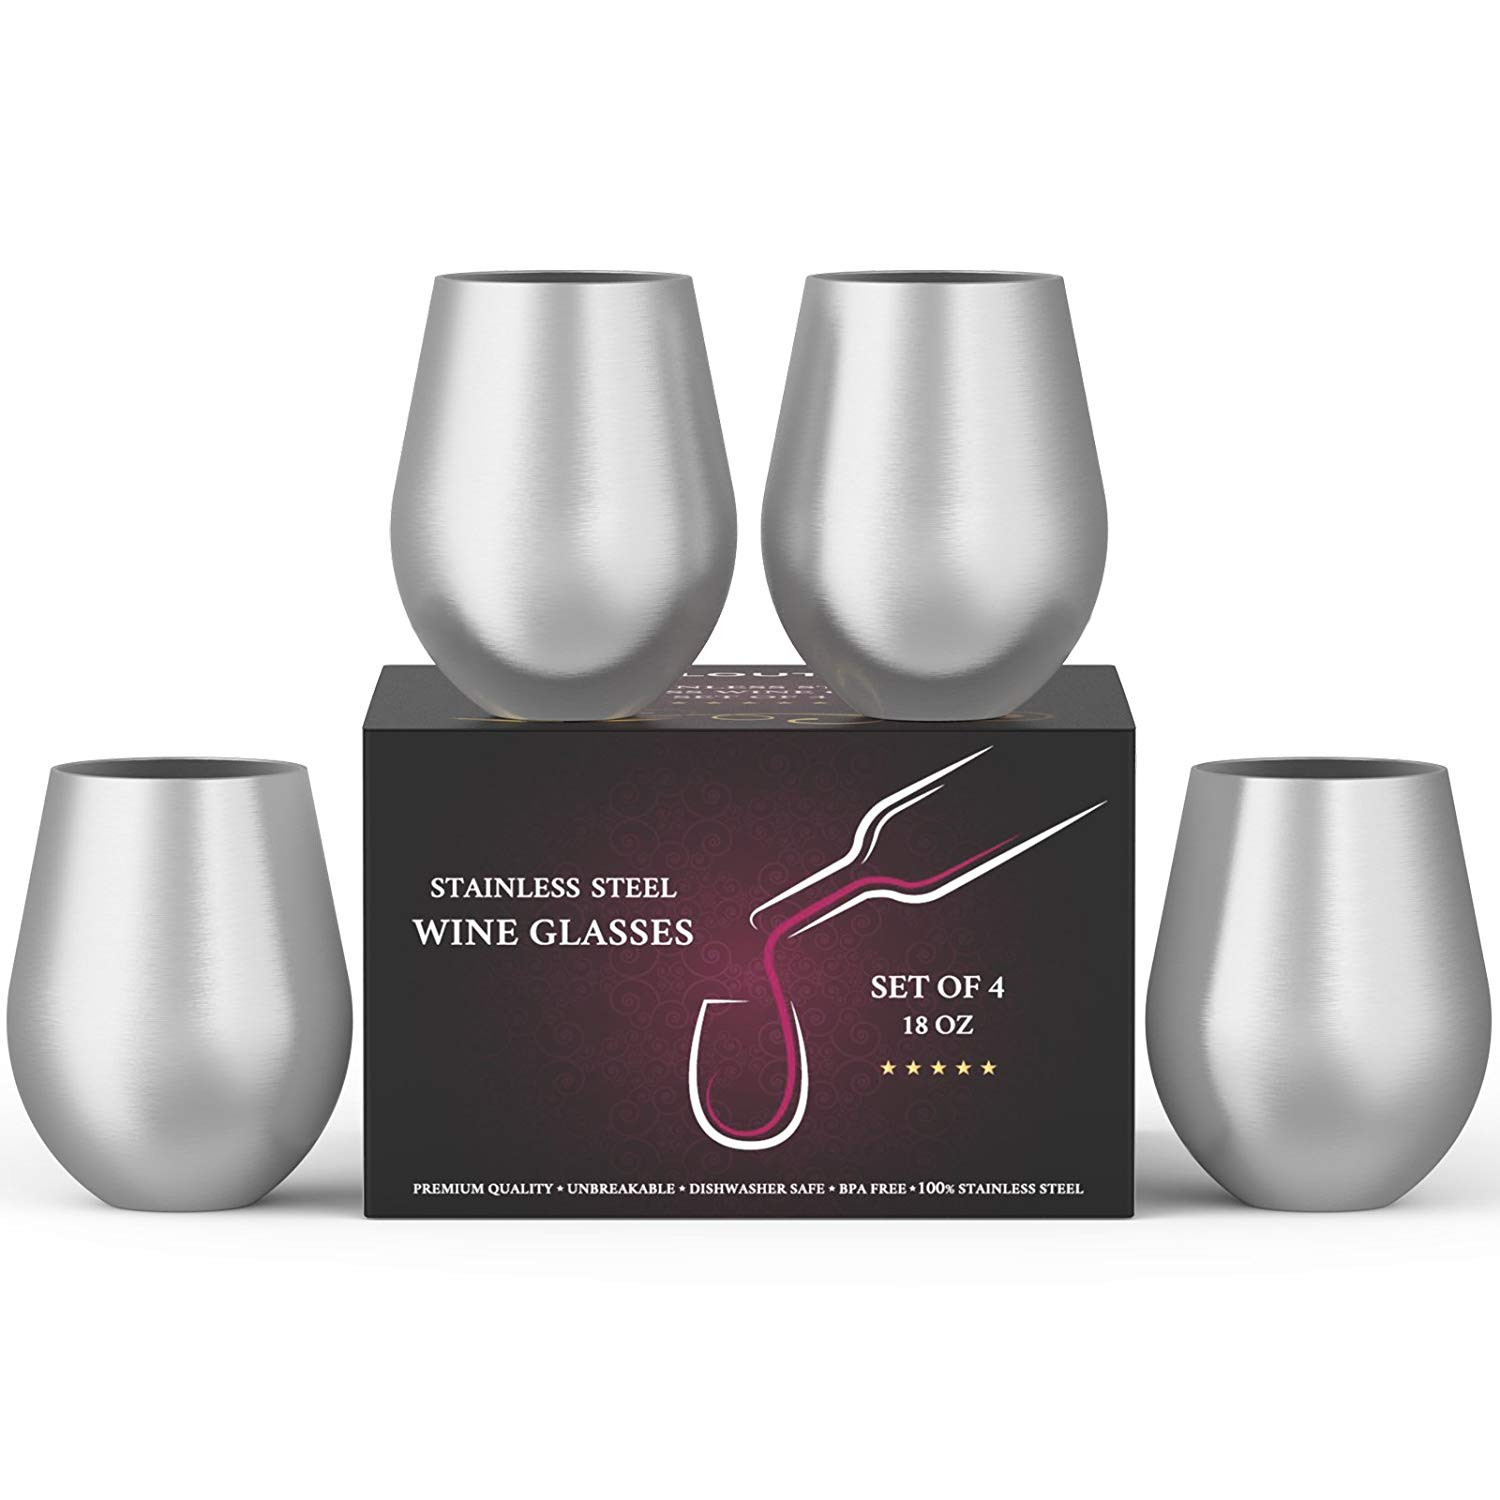 stainless steel floor vase of amazon com stainless steel wine stemless glasses set of 4 18 oz with regard to amazon com stainless steel wine stemless glasses set of 4 18 oz metal wine glasses 4 pack unbreakable dishwasher safe bpa free great for indoor